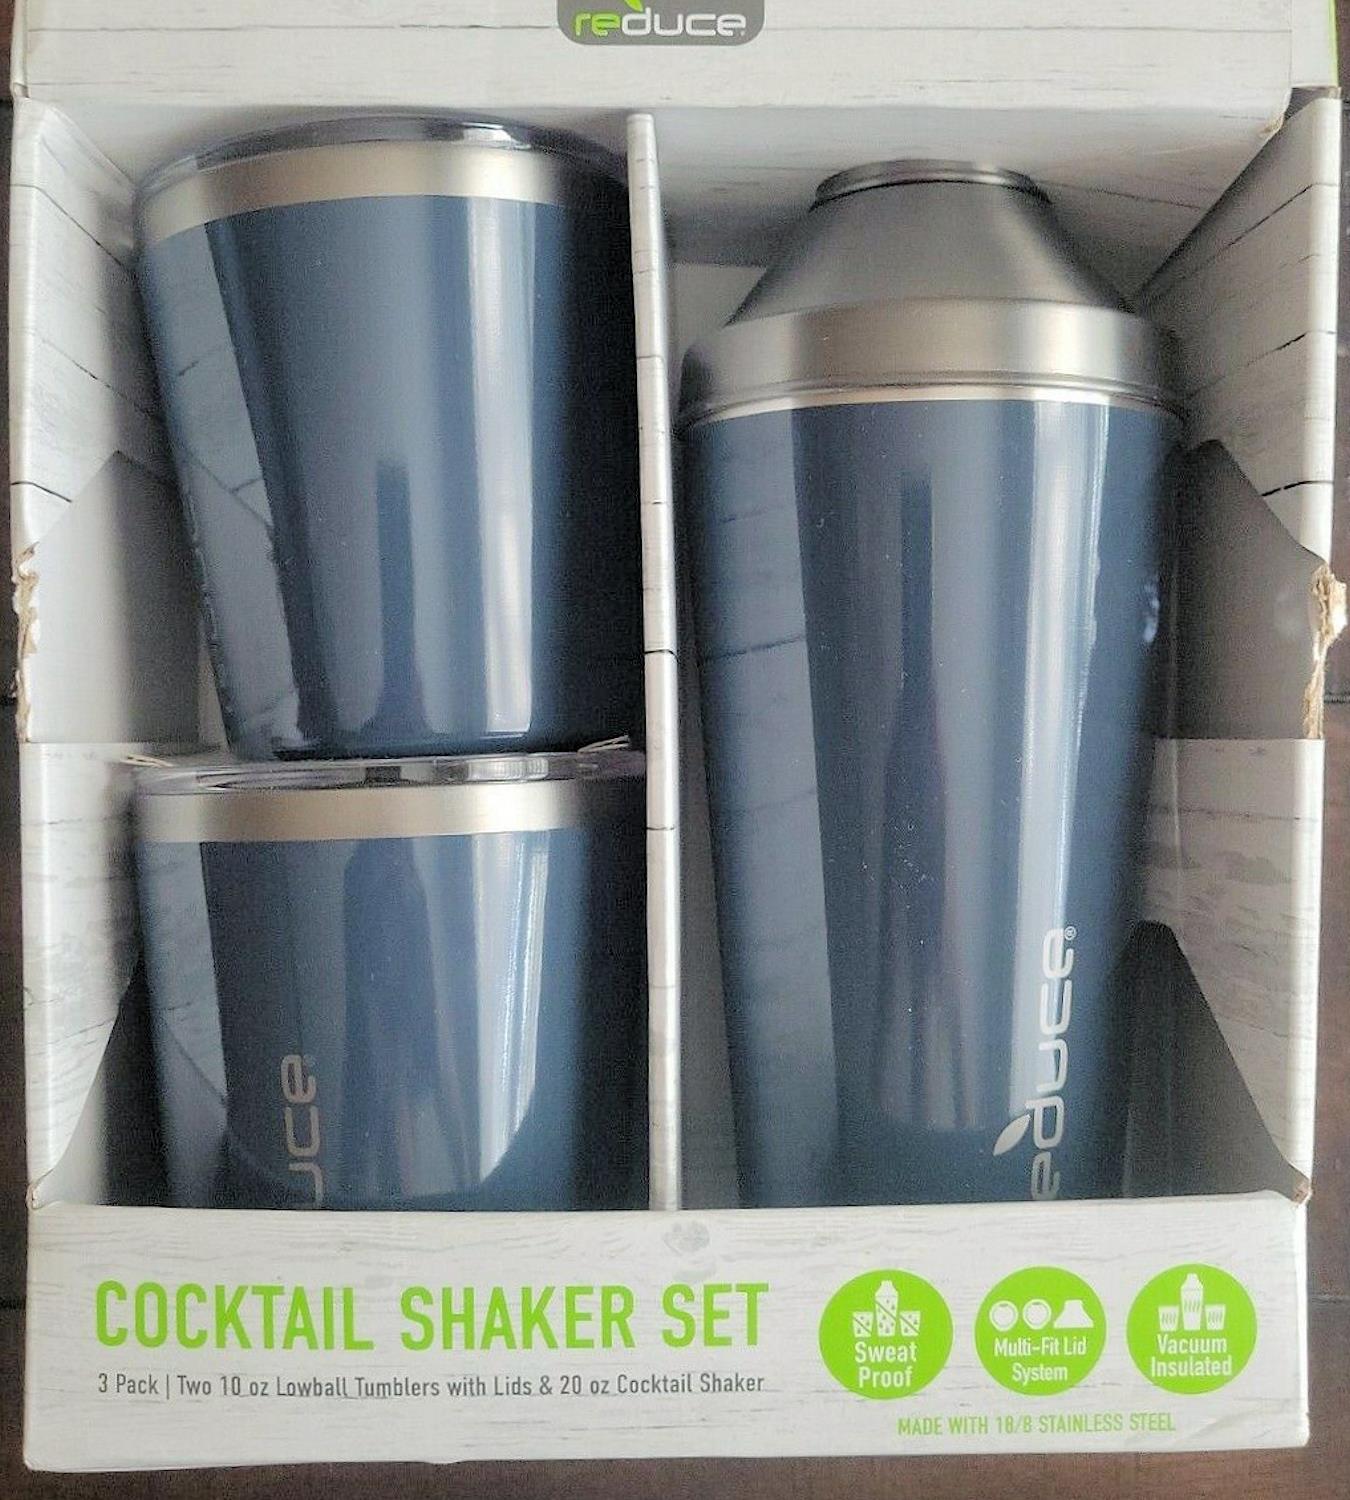 Reduce 3 Pc Cocktail Shaker with Two 10-oz. Lowball Tumblers with Lids Stainless Steel